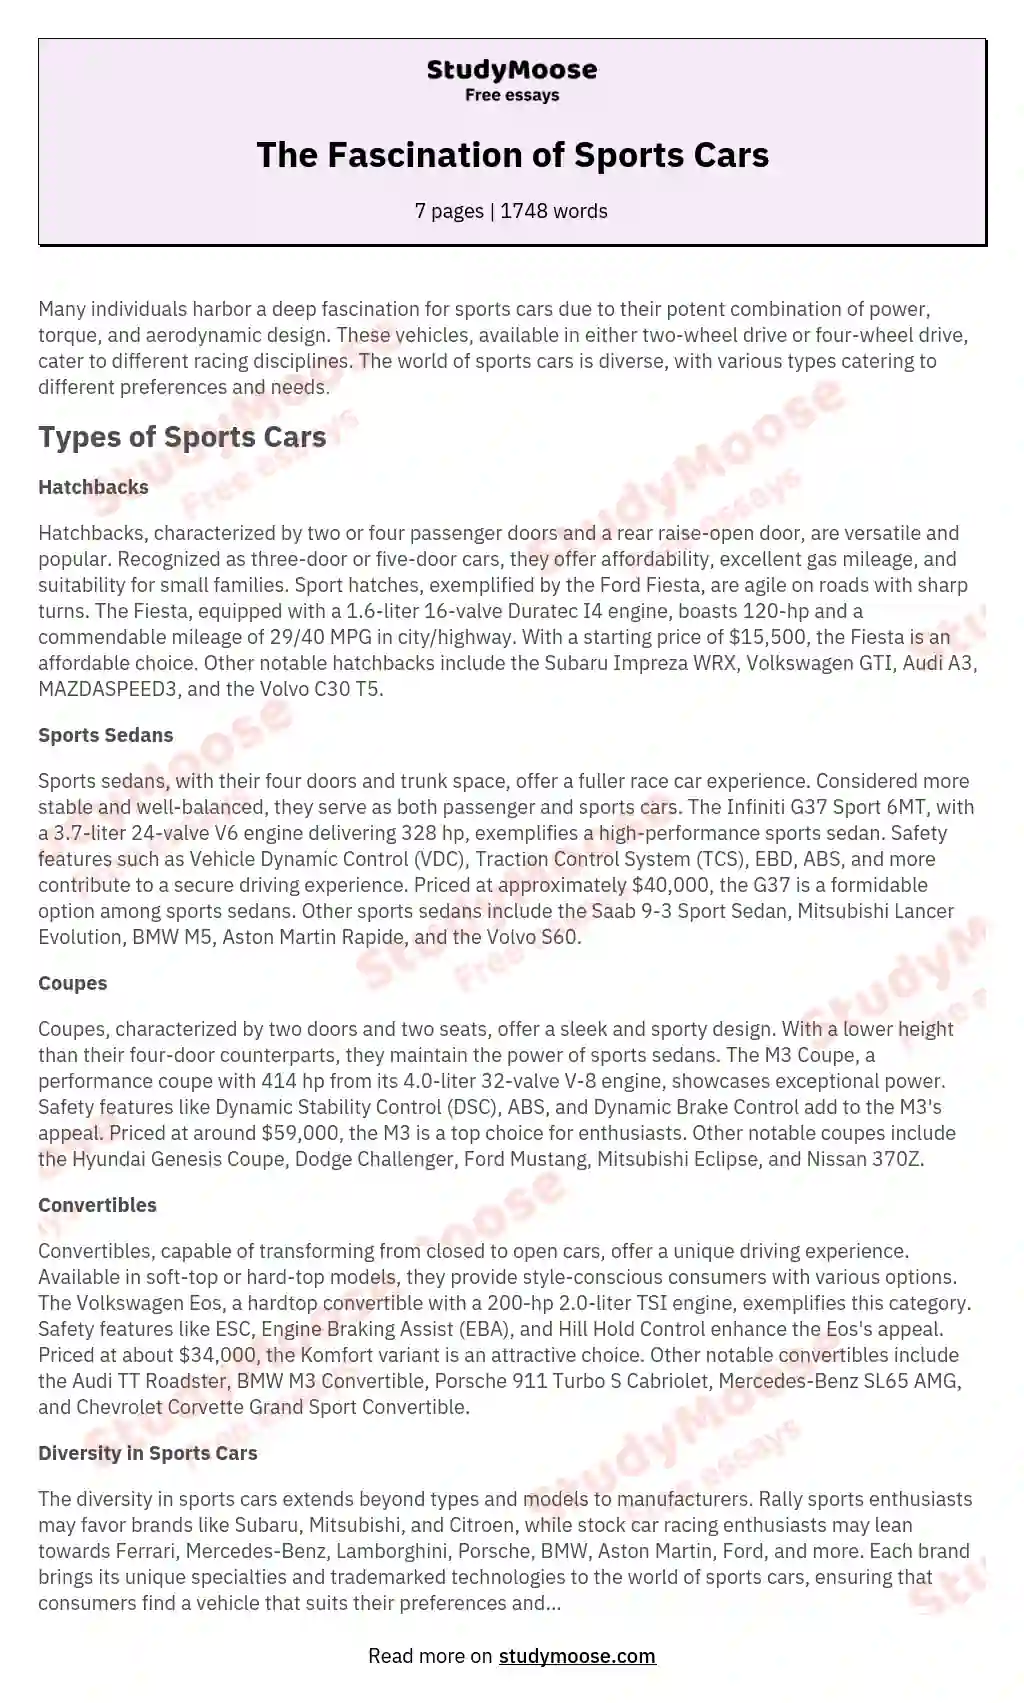 The Fascination of Sports Cars essay